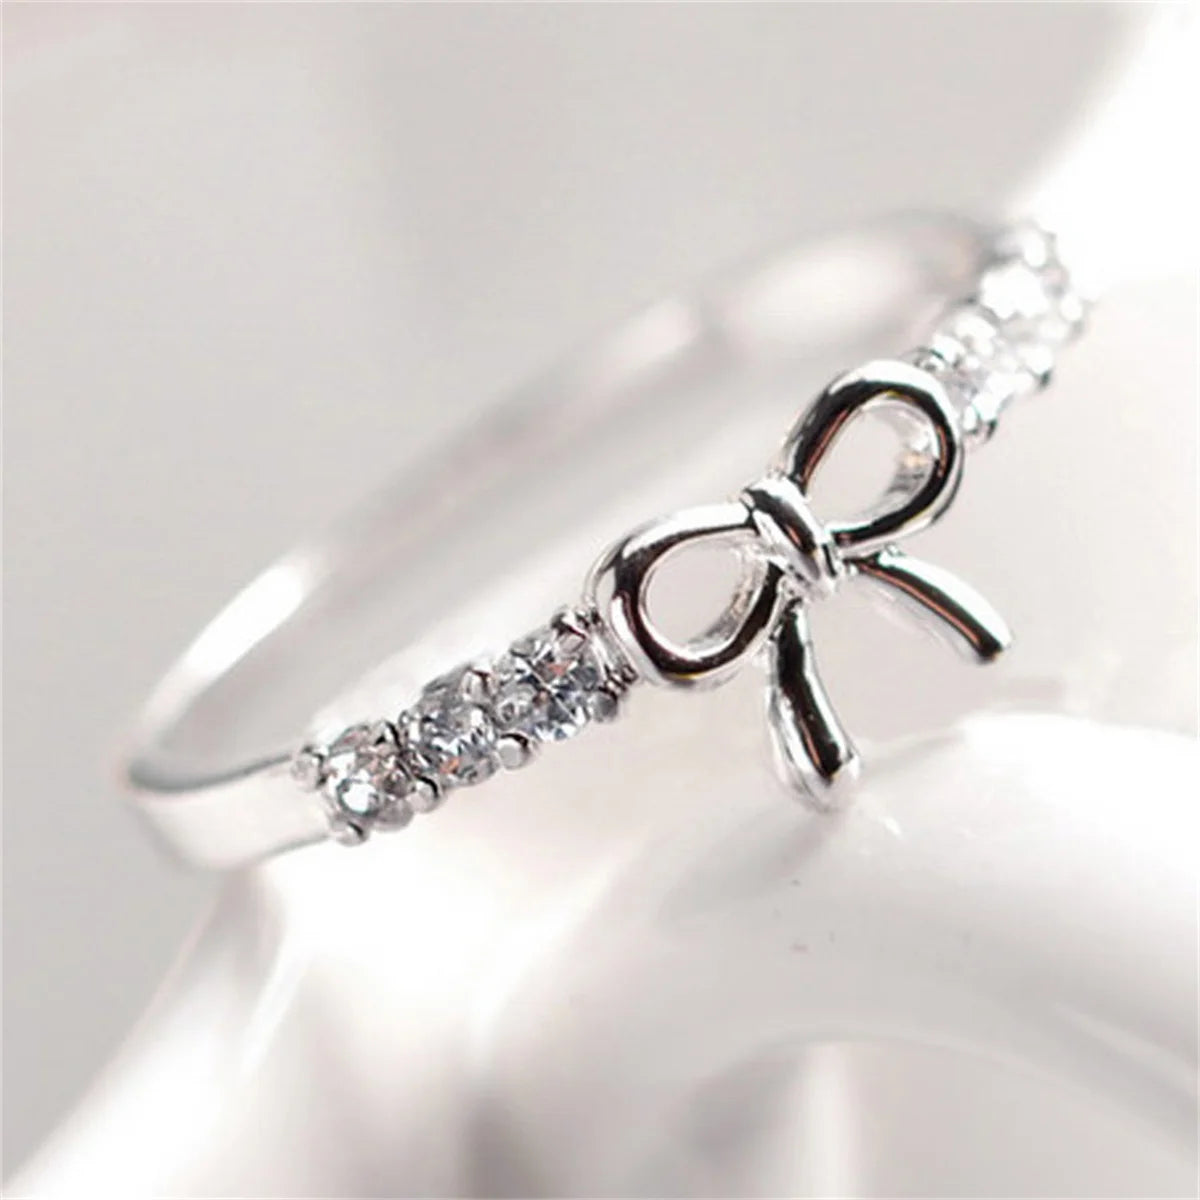 Chic Bowknot Shaped Finger Rings For Women Girls Fashion Sparkling Zircon Bow Wedding Bands Minimalist Party Luxury Jewelry Gift